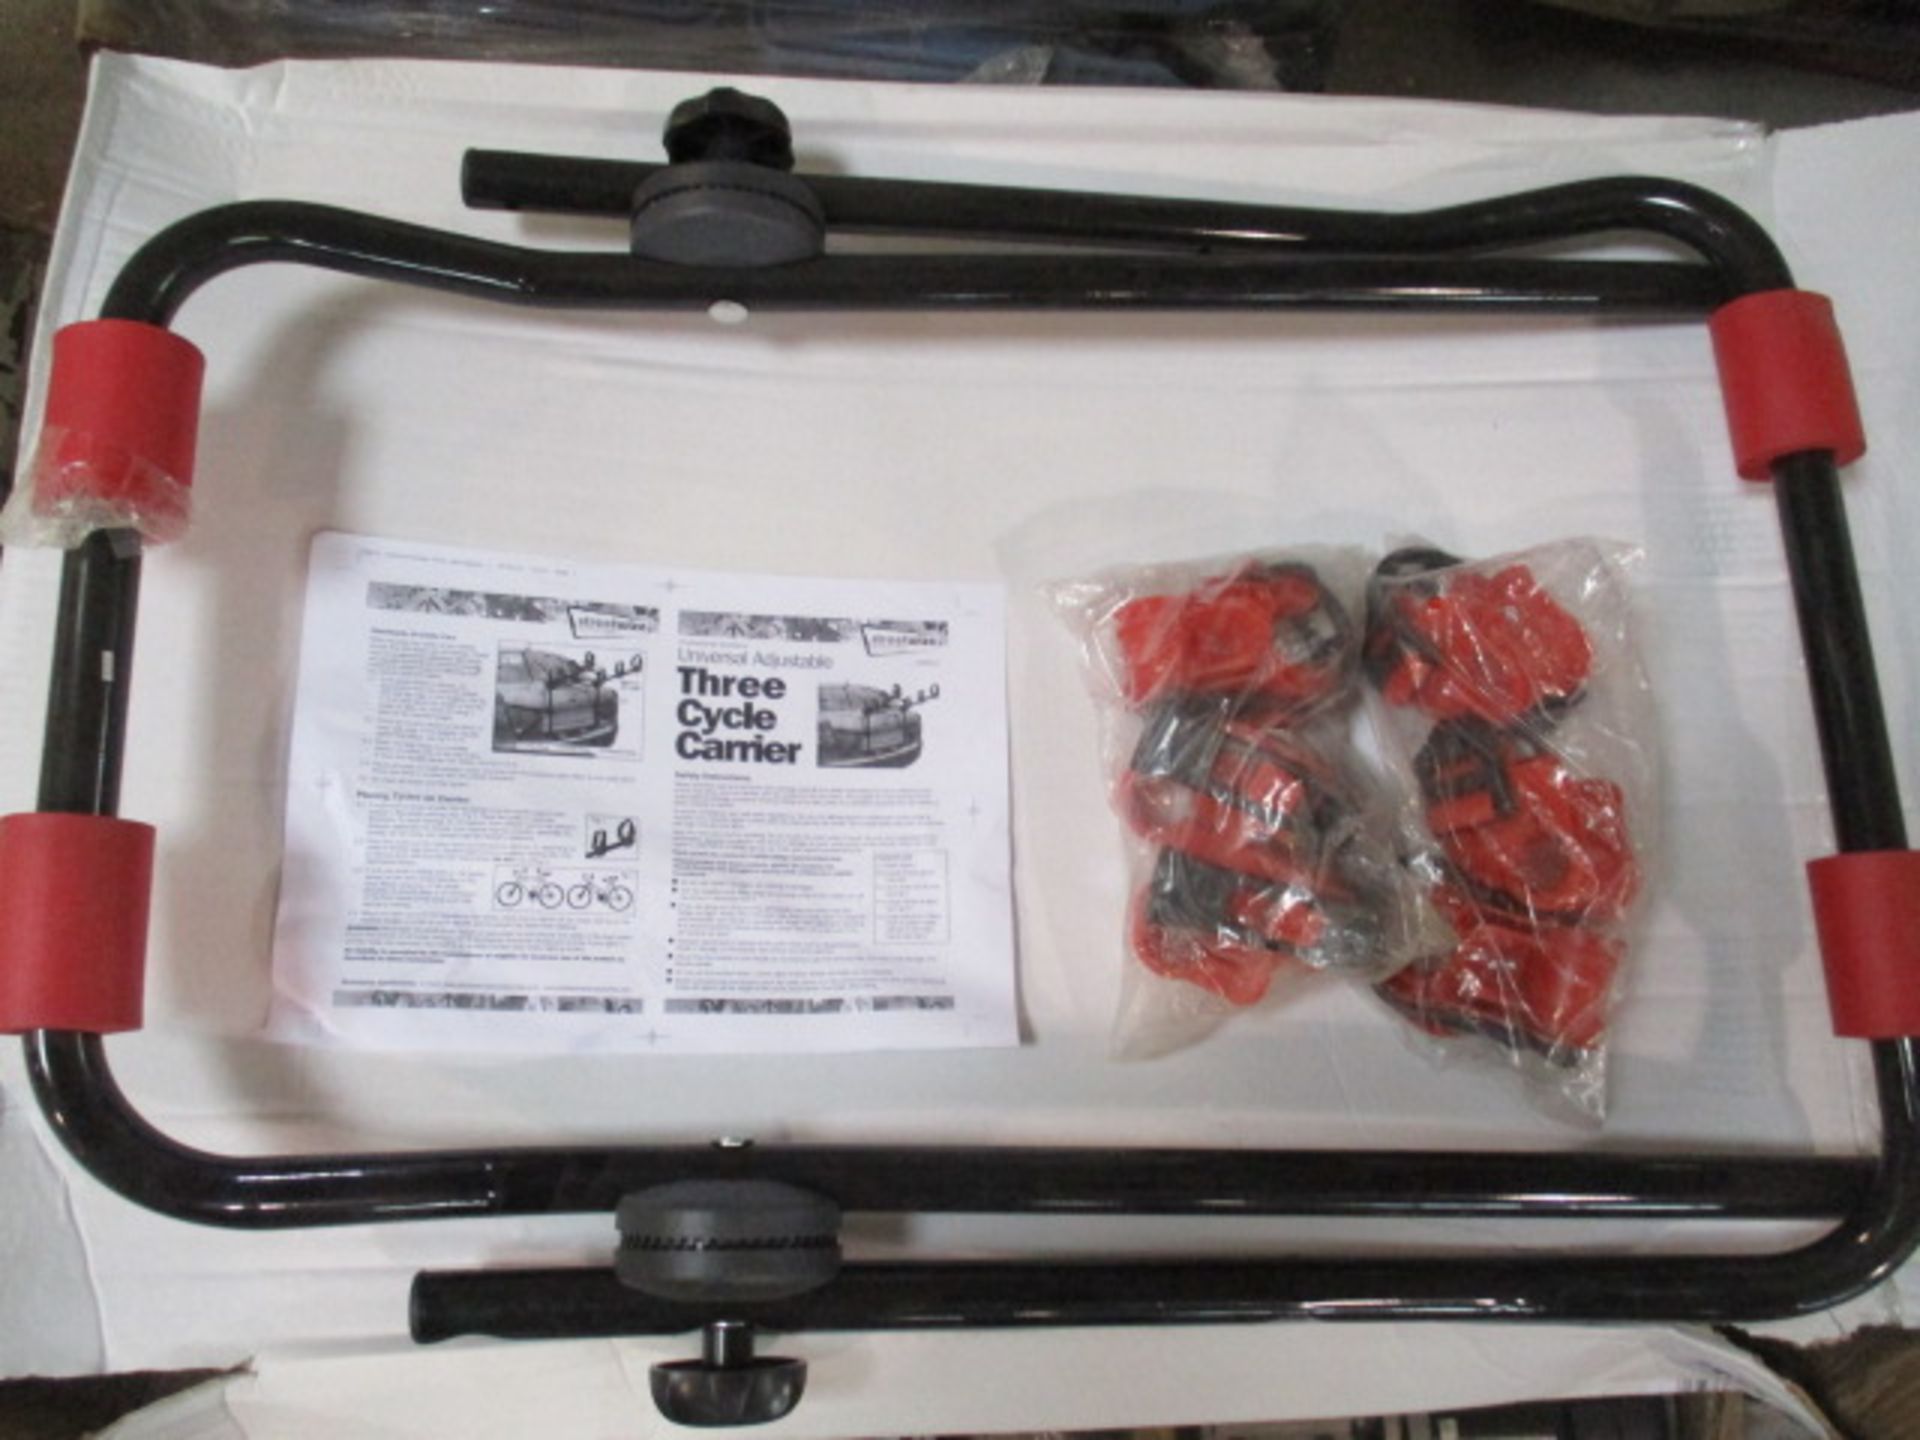 Unused boxed Streetwize 3 cycle carrier with all attachments RRP £39.99.